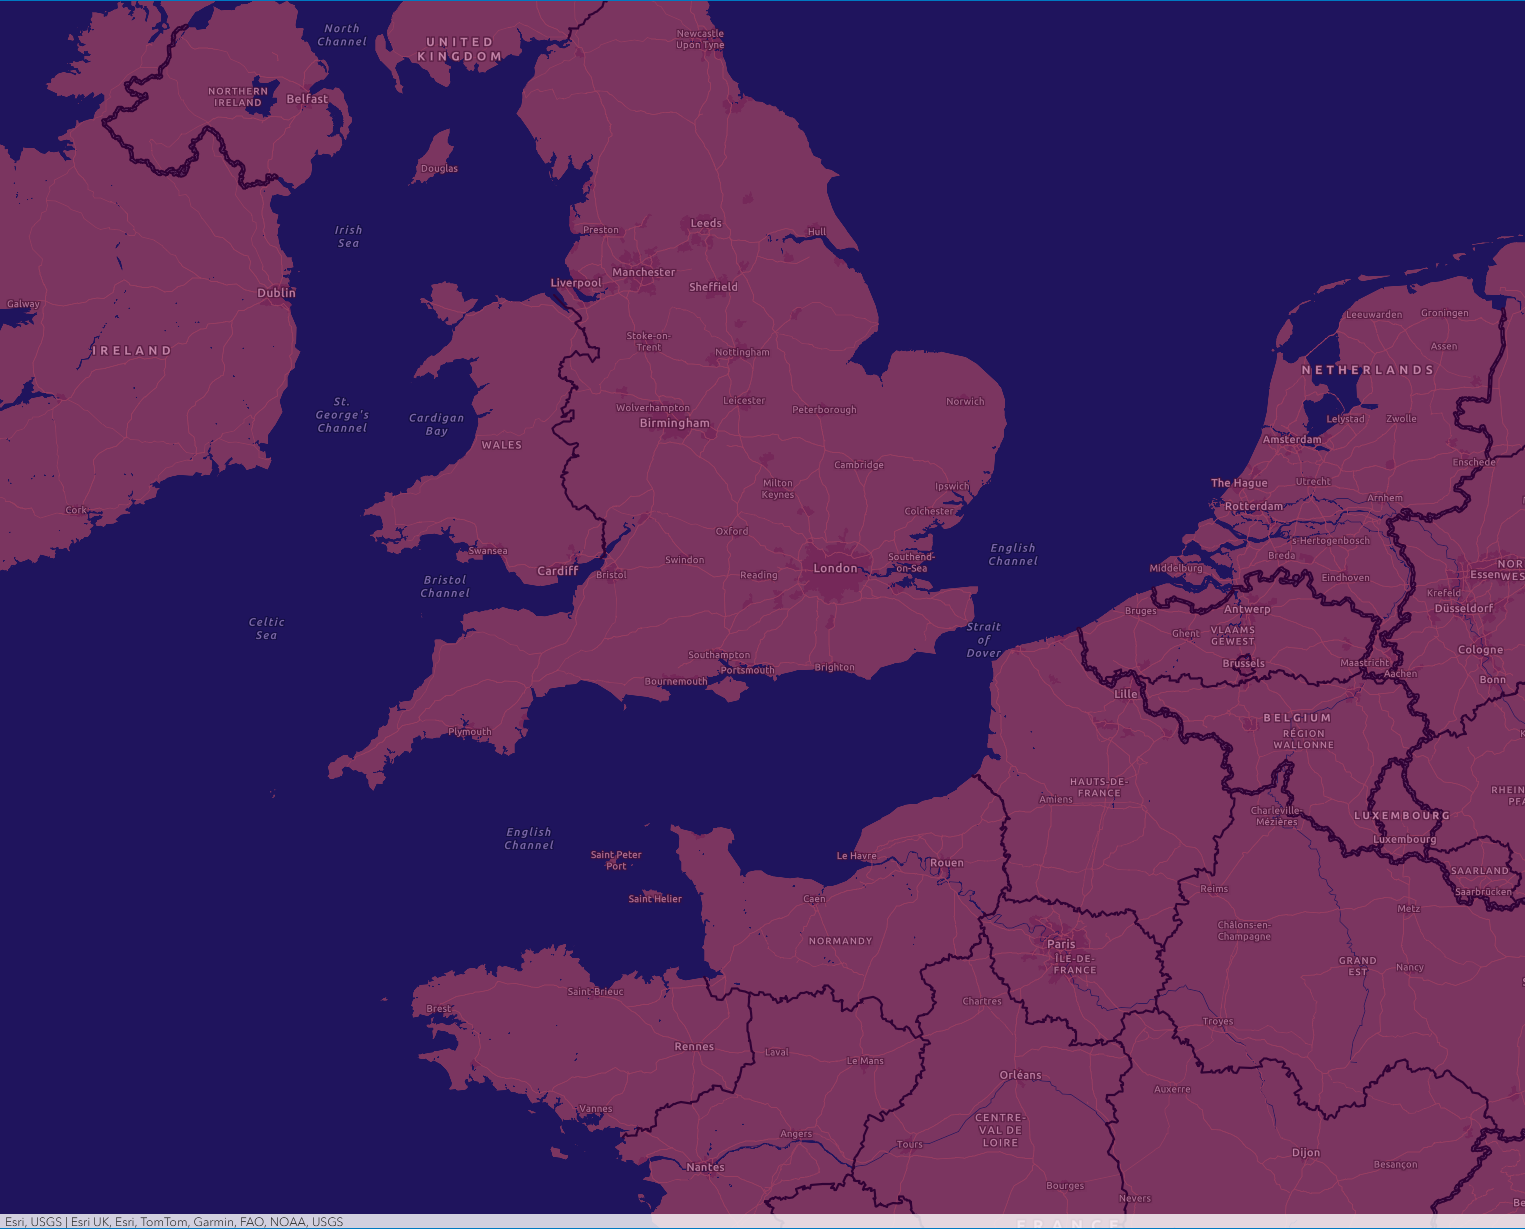 A basemap created in Vector Style Editor using the suggested colour scheme - predominantly soft pink and blue-purple.